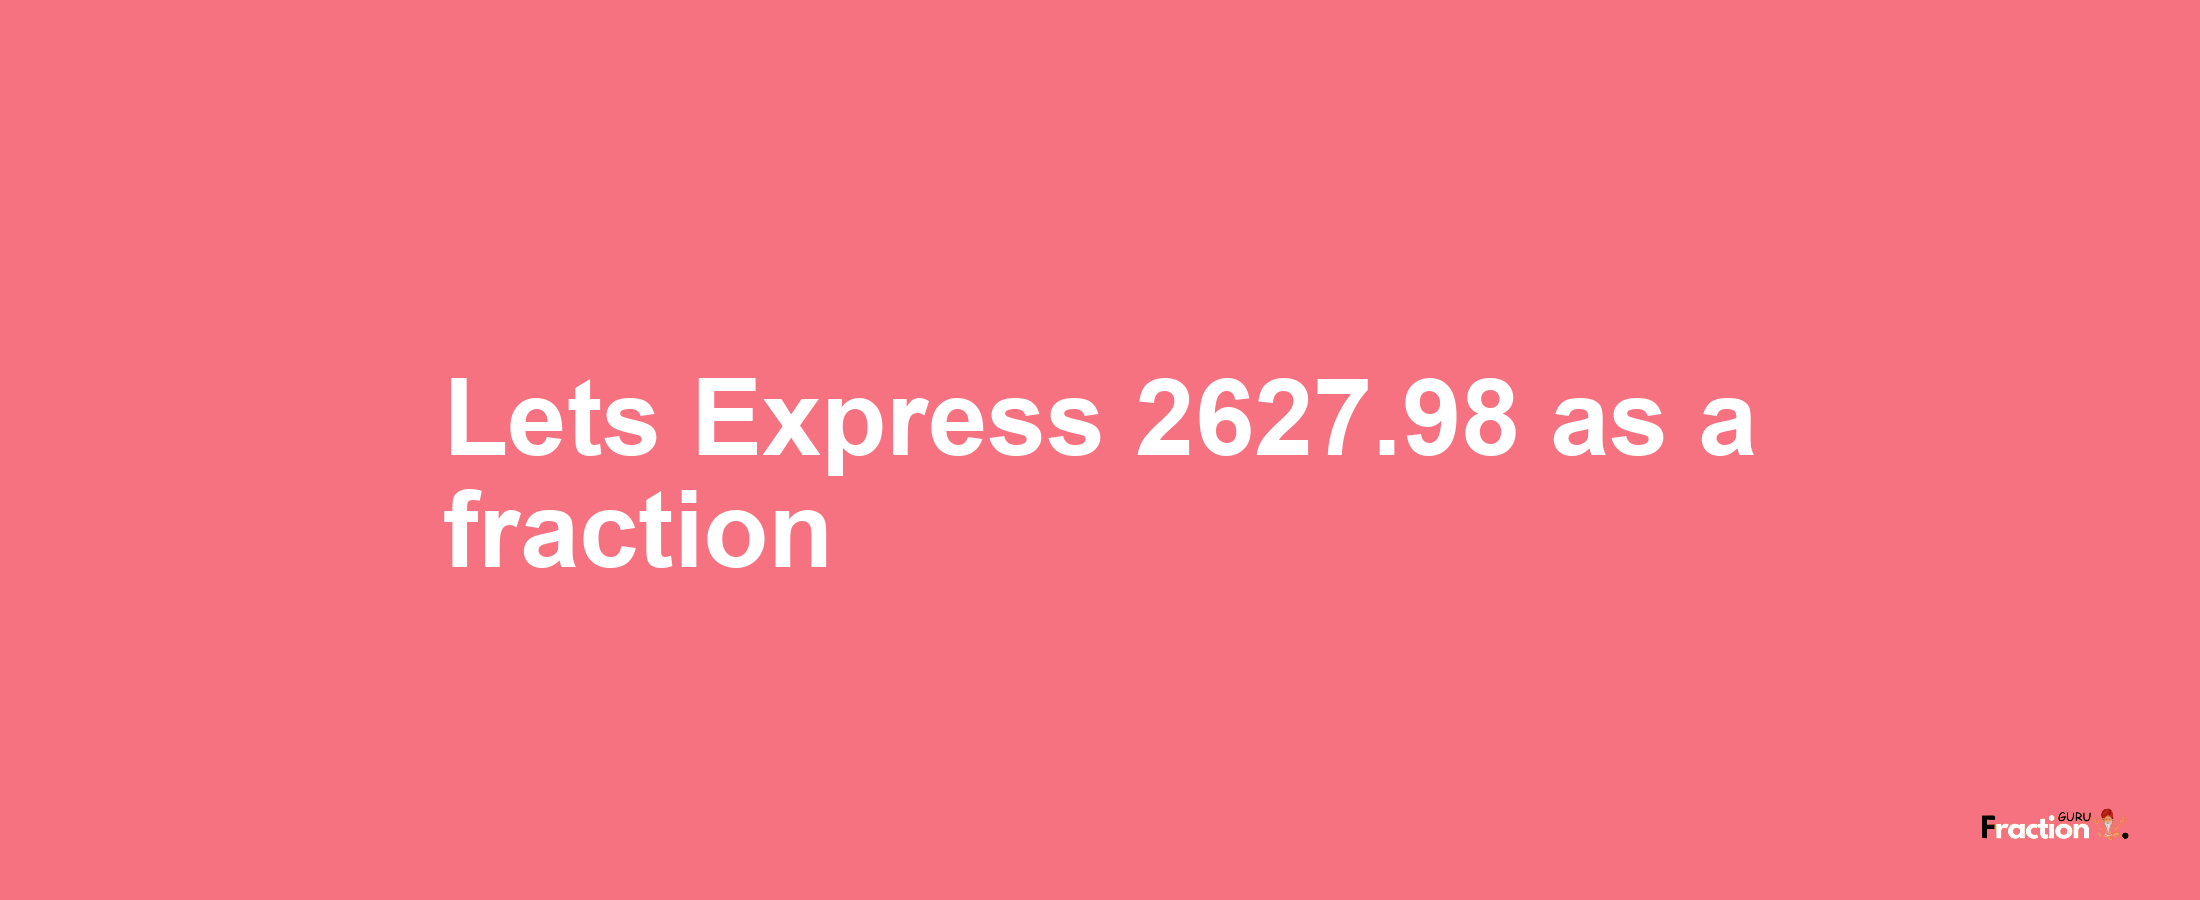 Lets Express 2627.98 as afraction